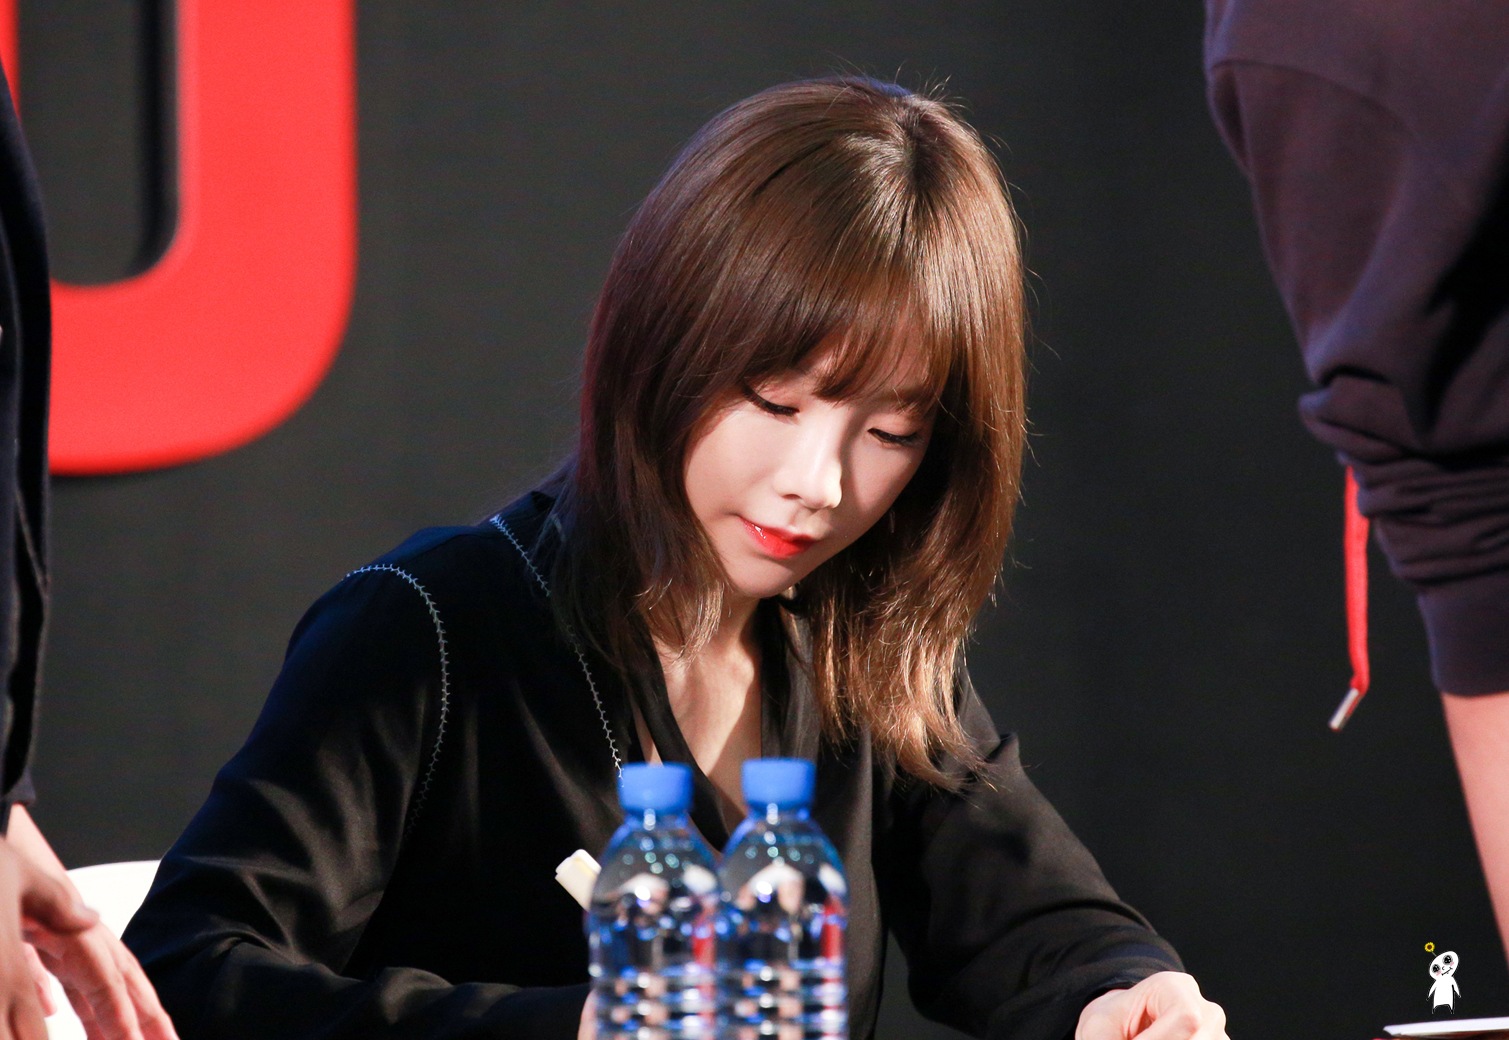 Signing diligently for the fans that came out to the event.